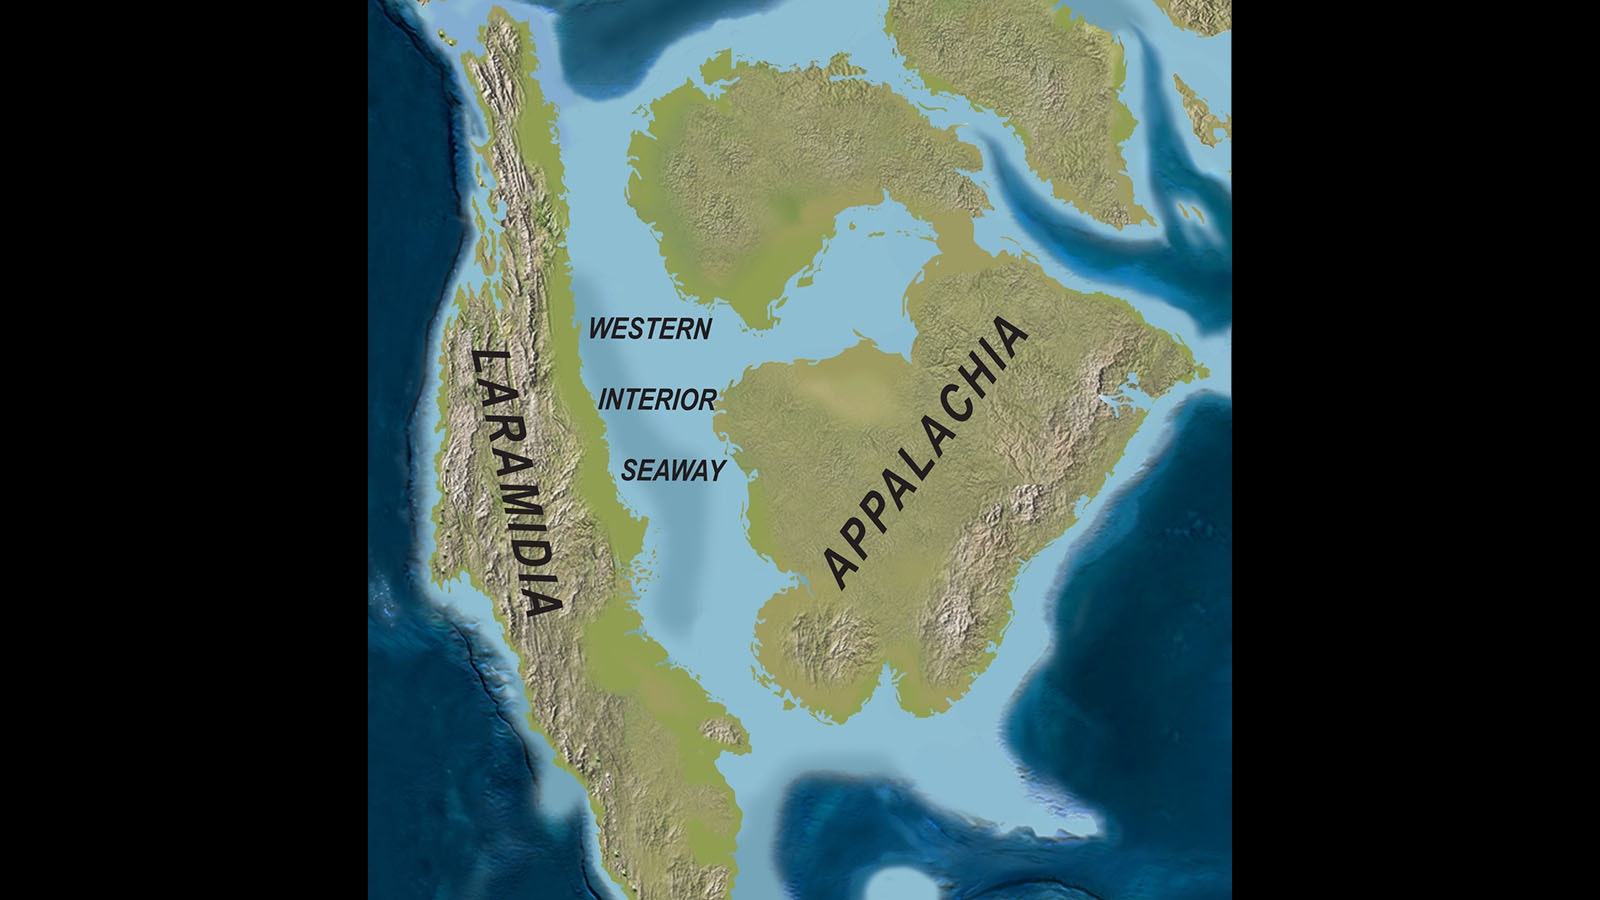 This map shows the prehistoric land masses that came together around the Wyoming craton to create North America. What is Wyoming today is near the center of the Western Interior Seaway.